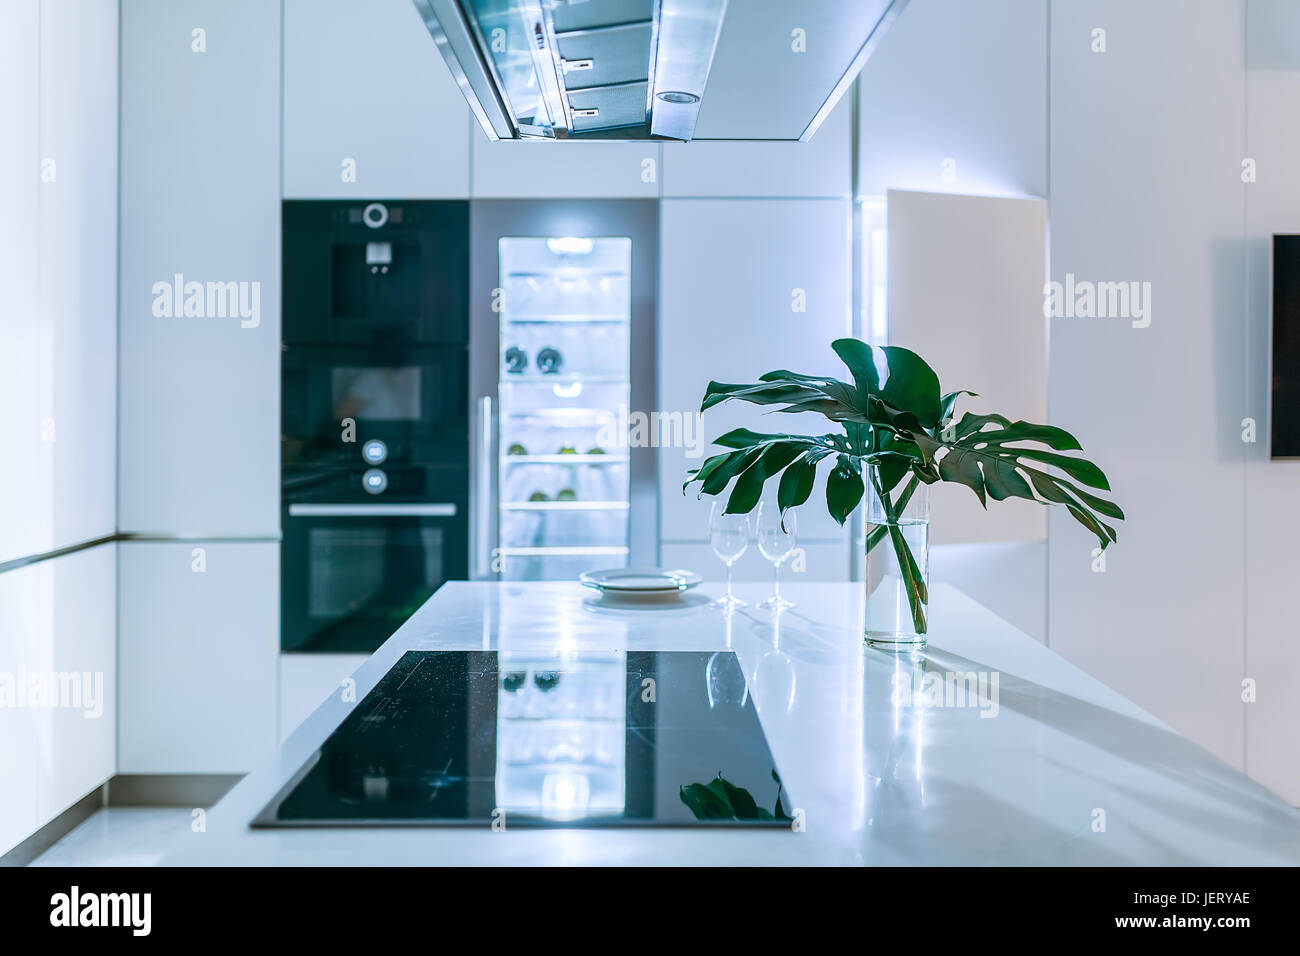 Illuminated modern kitchen with light walls. There is a white tabletop with a stove, plates, glasses, vase with green leaves. Behind it there is an ov Stock Photo